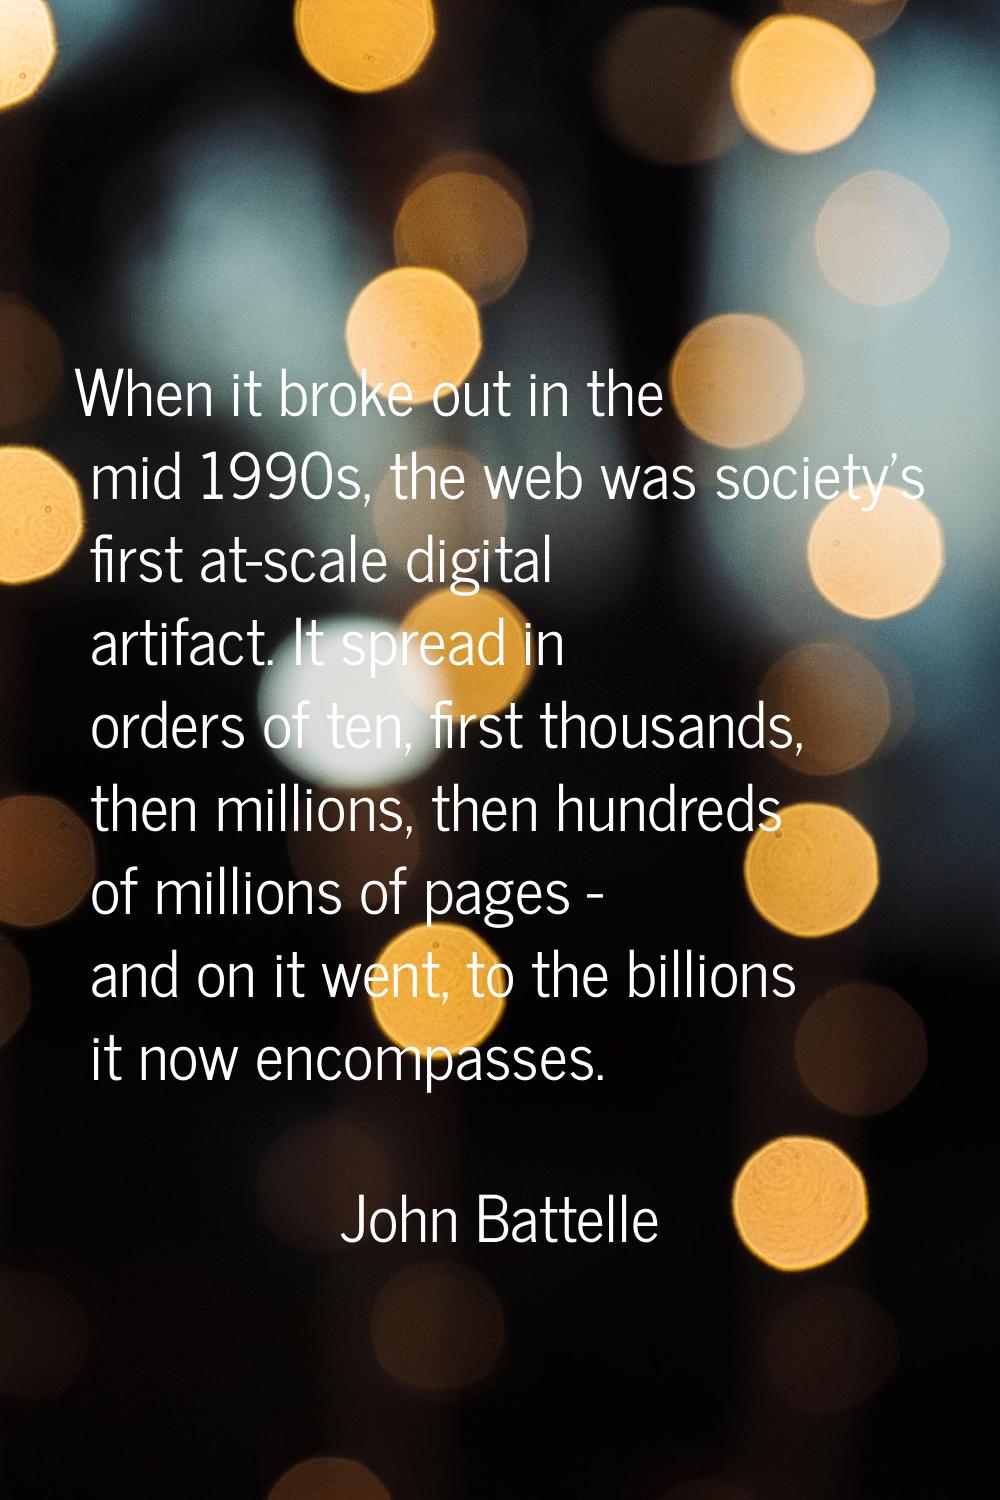 When it broke out in the mid 1990s, the web was society's first at-scale digital artifact. It sprea